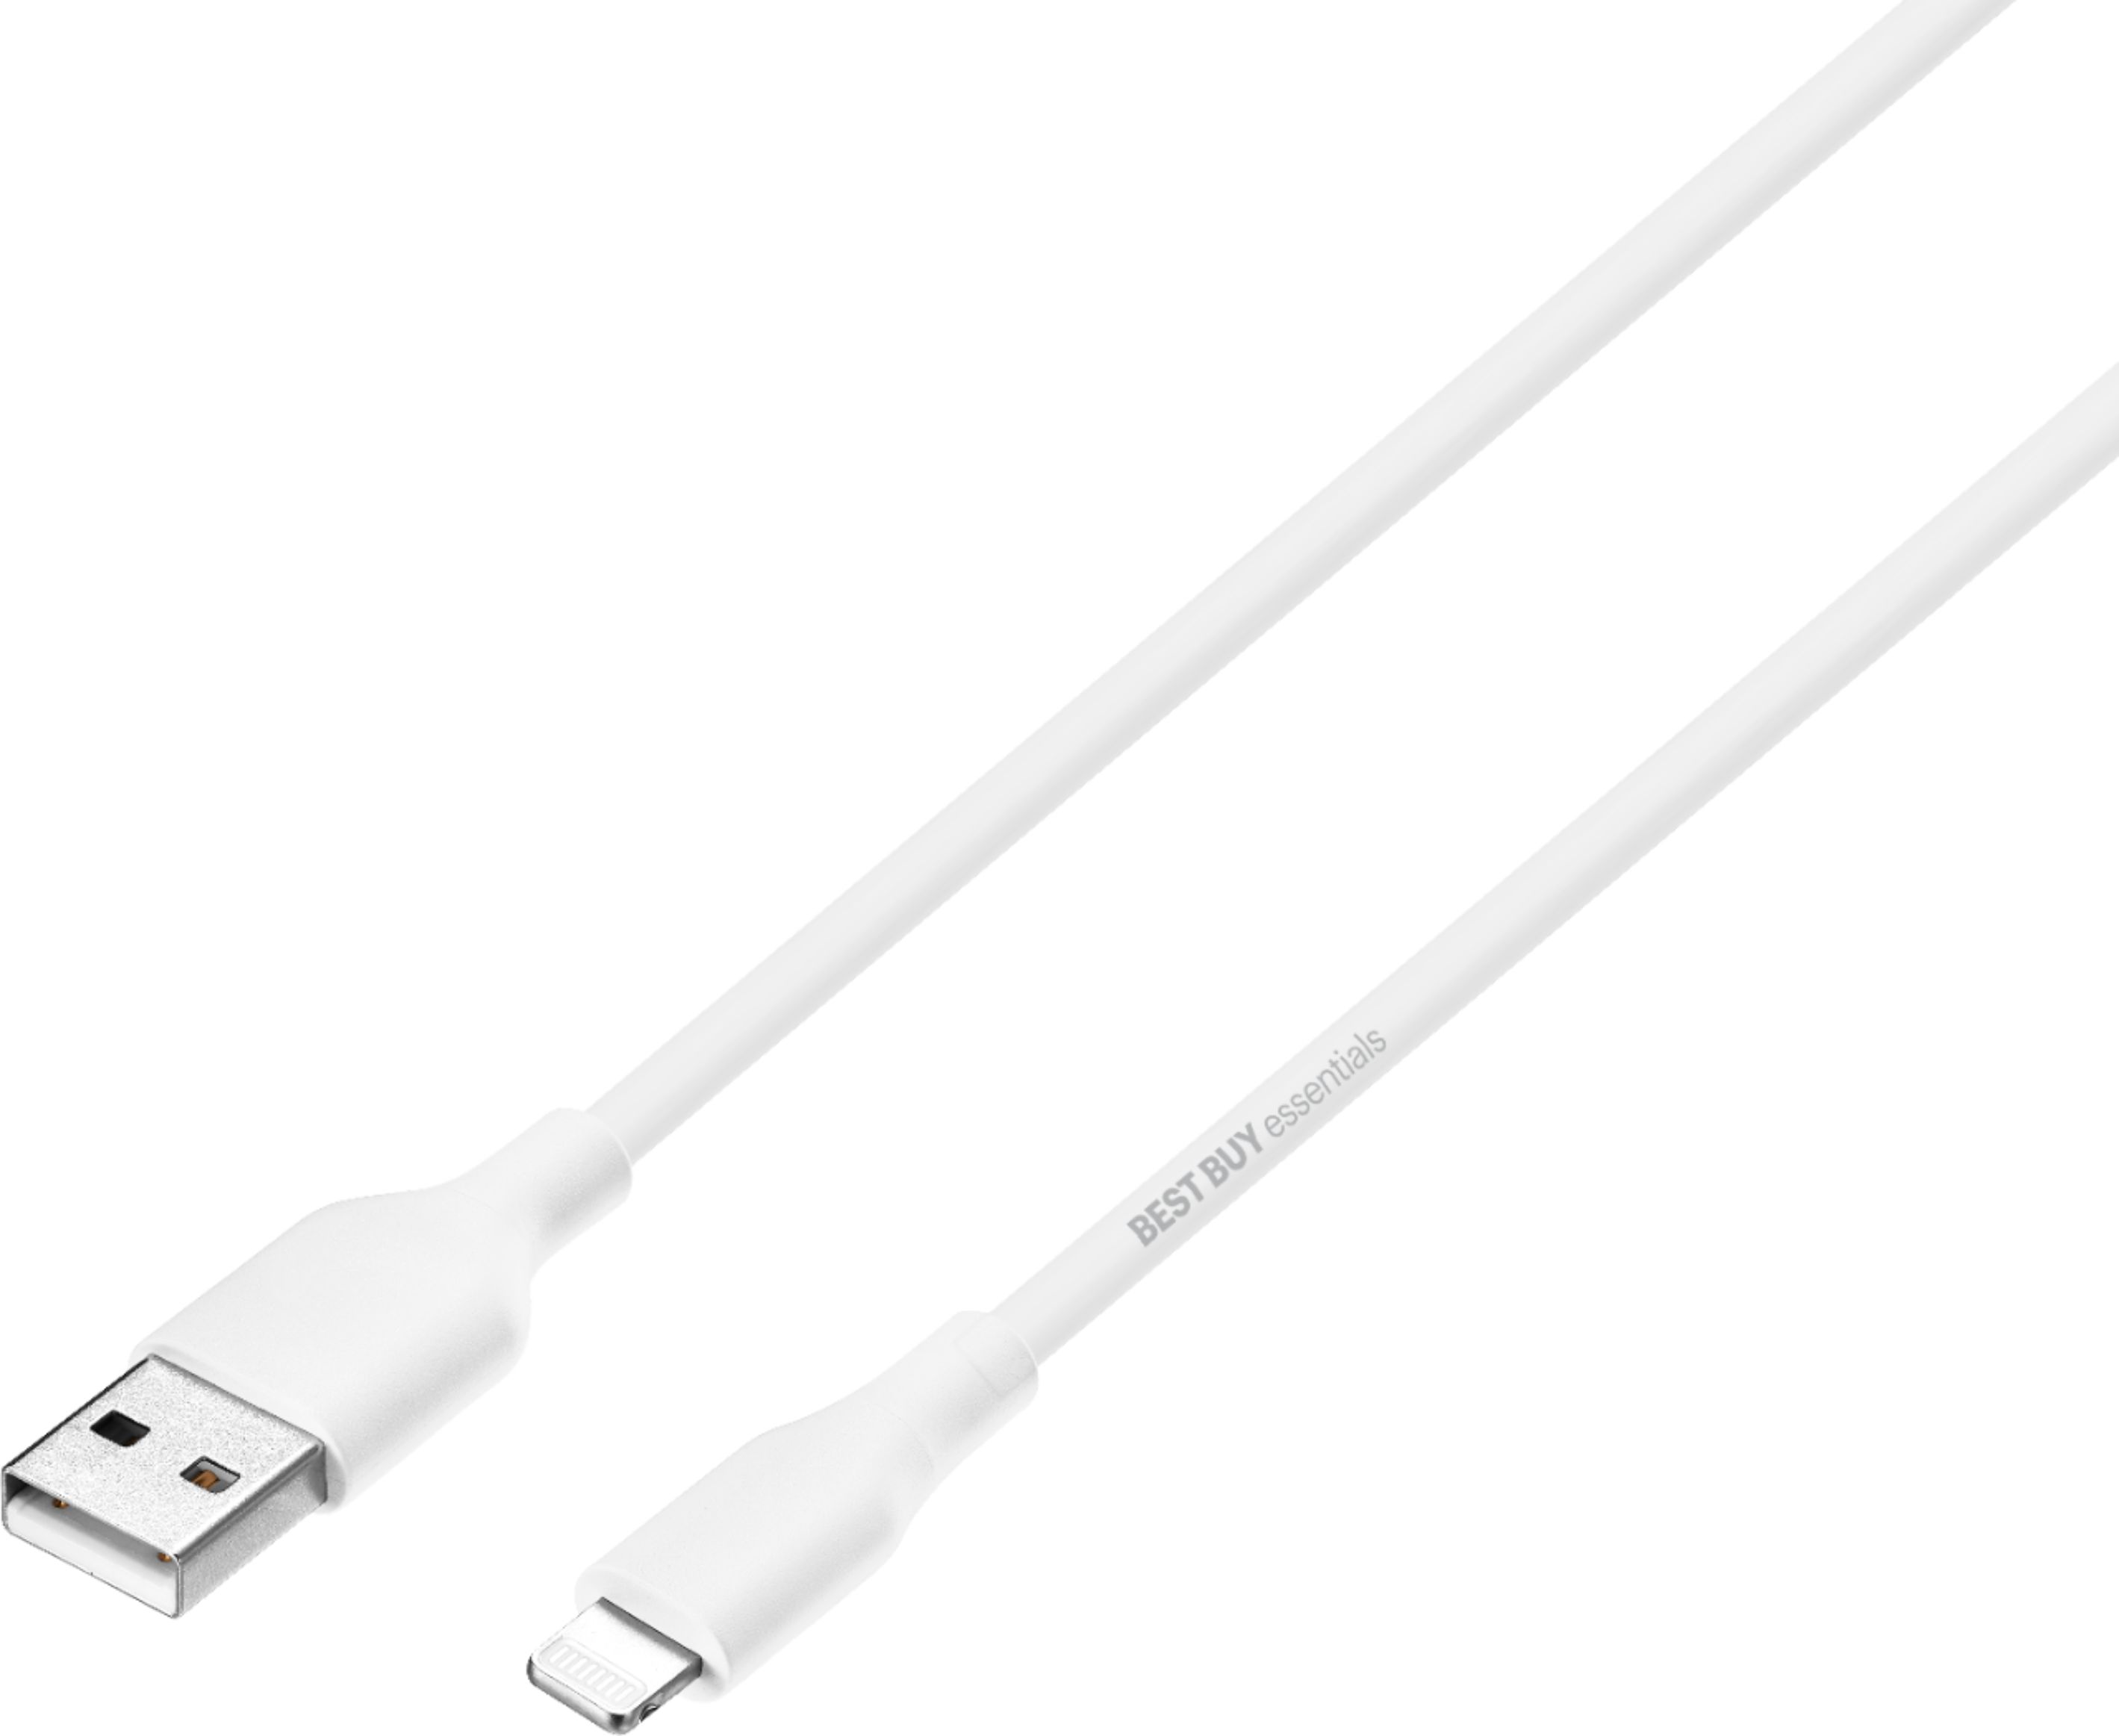 Apple USB-C Woven Charge Cable (1m) White MQKJ3AM/A - Best Buy